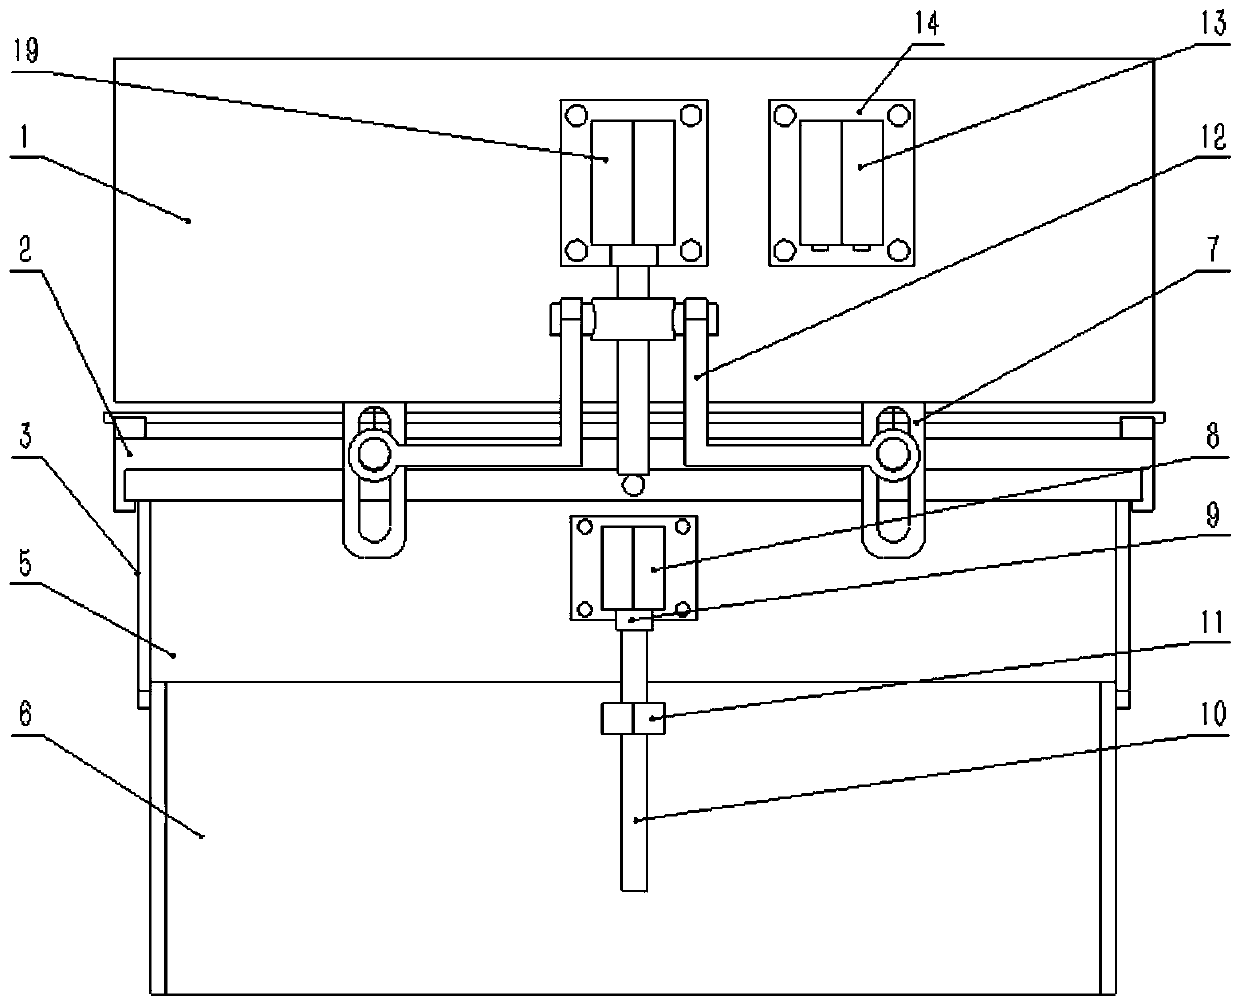 An adjustable and detachable high-speed stern wave suppressing device